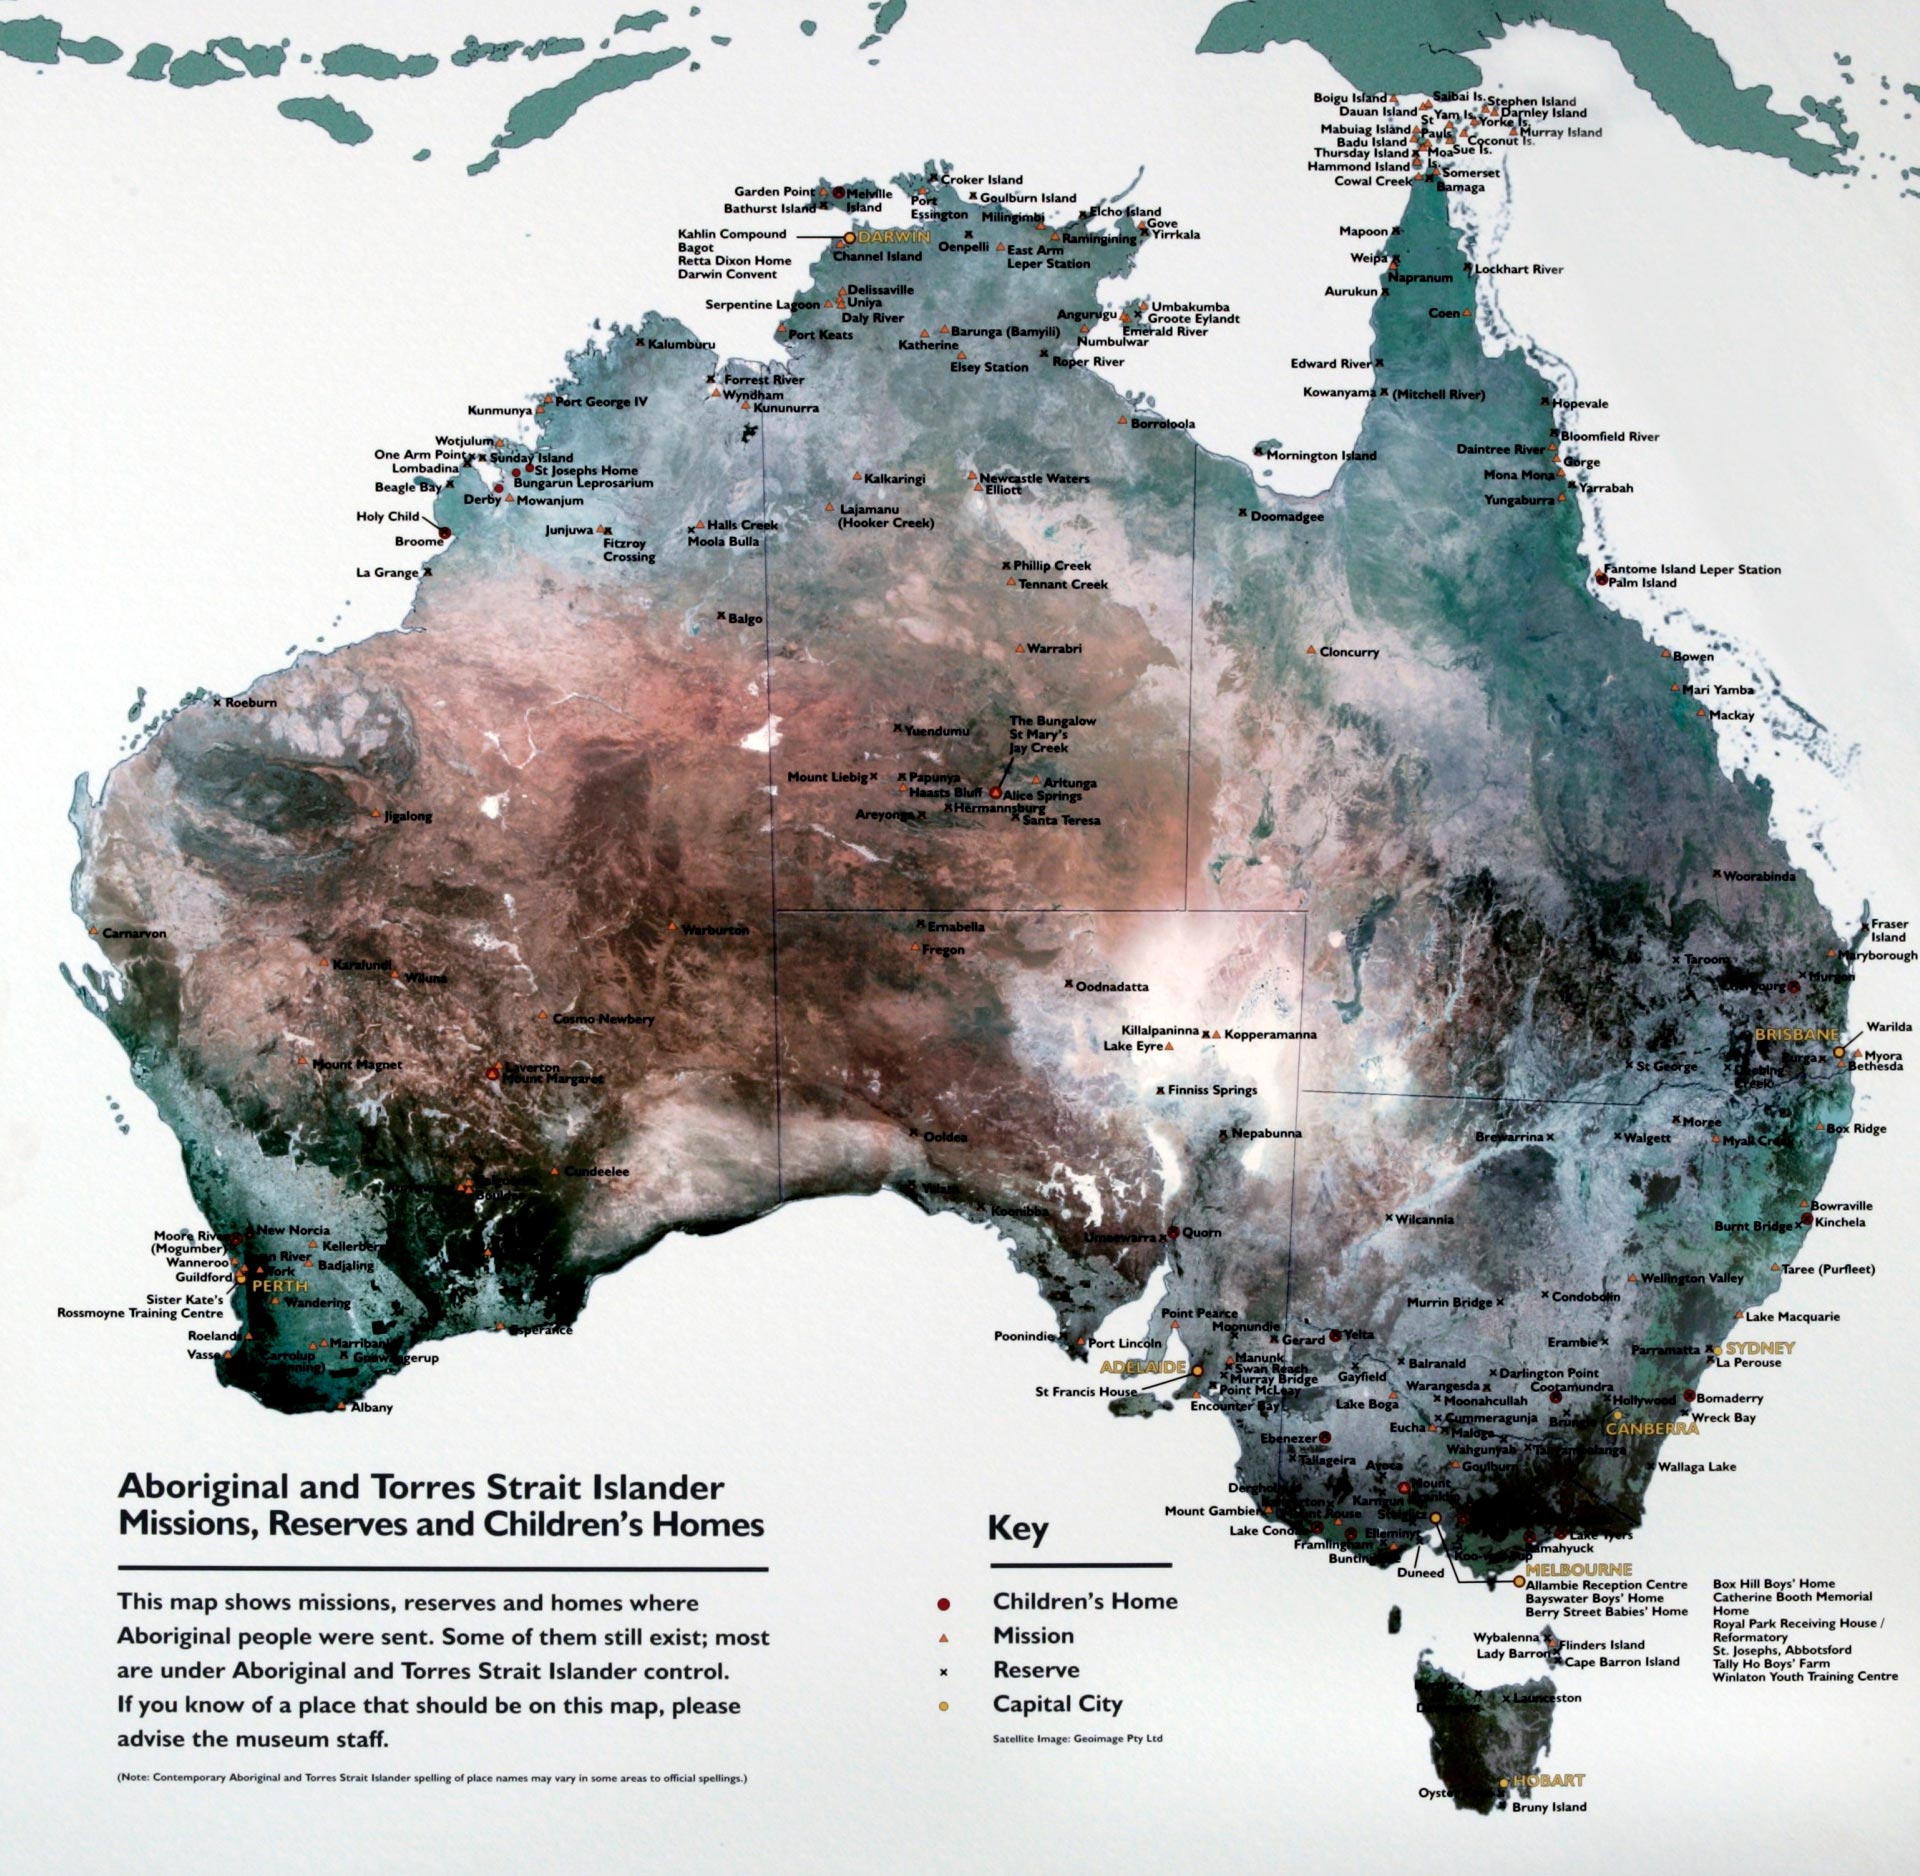 Map of Aboriginal and Torres Strait Islander missions, reserves and children’s homes.